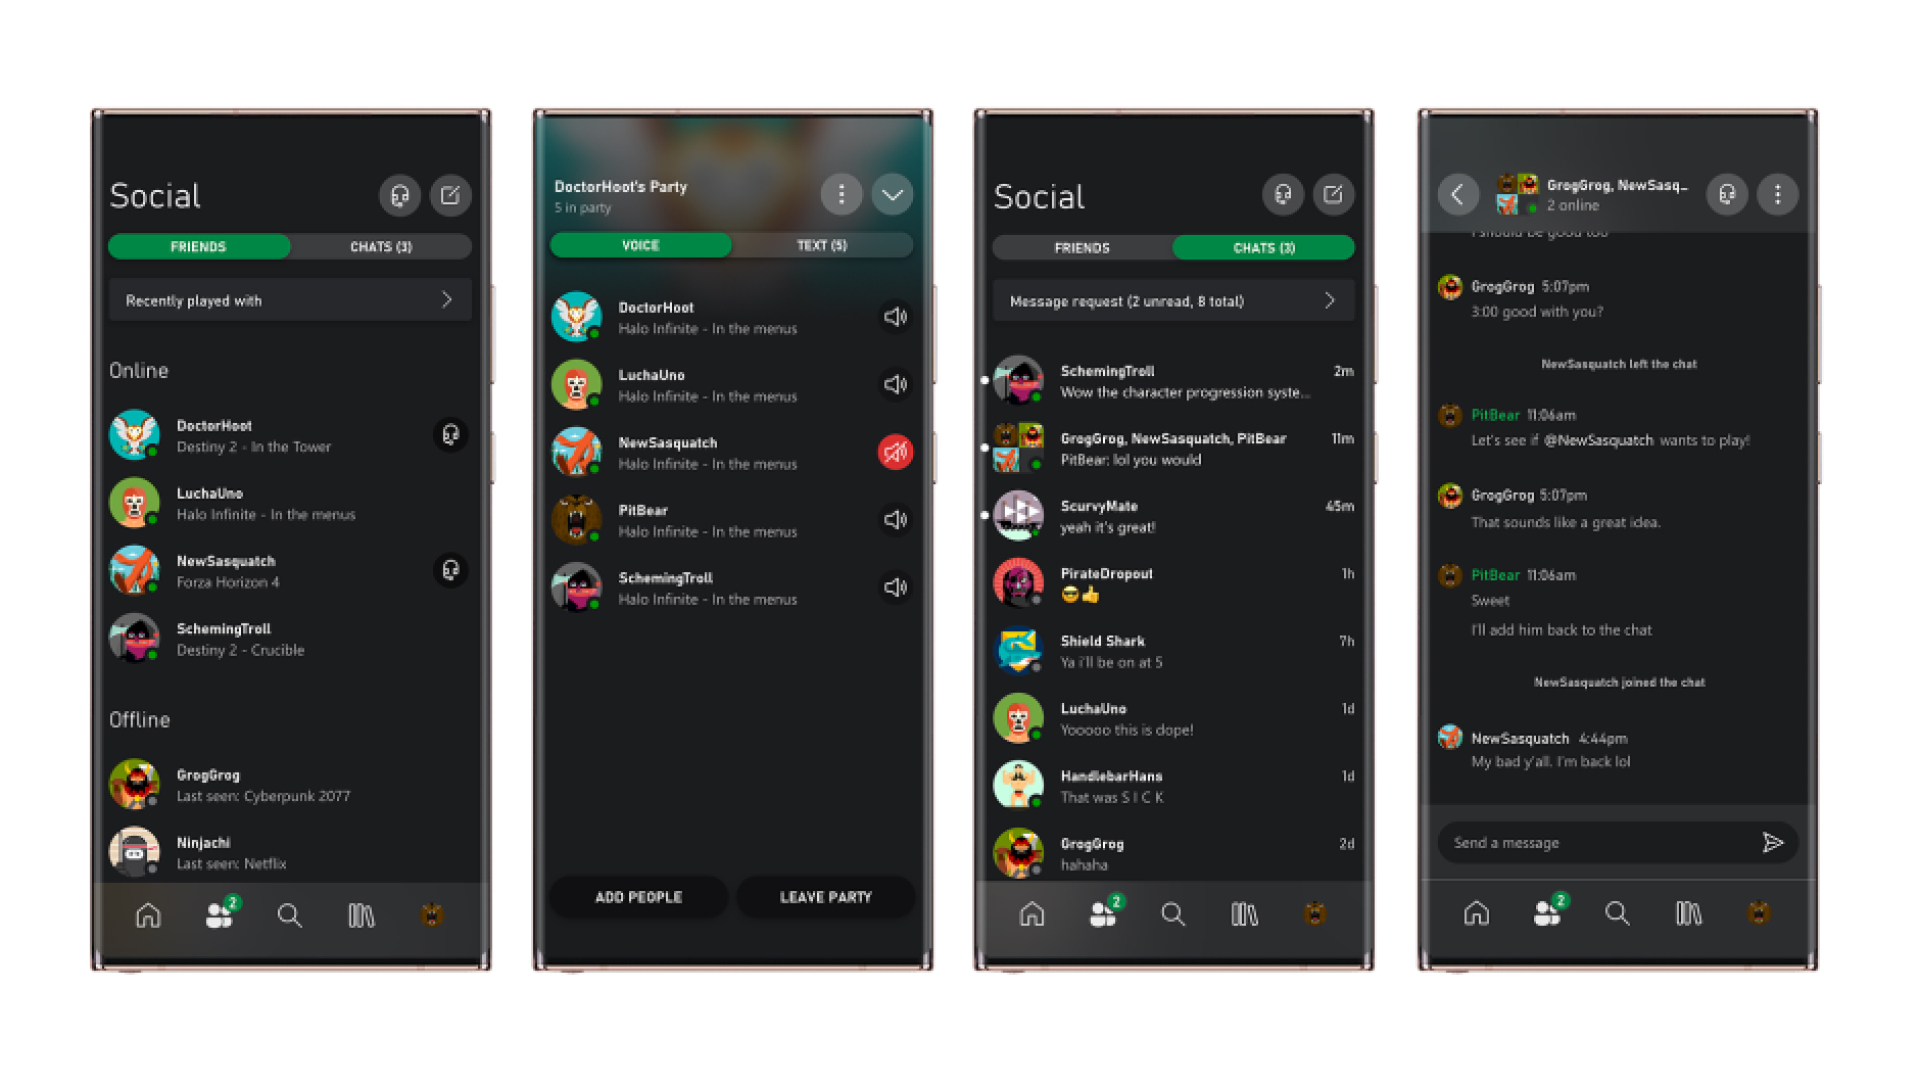 New Xbox App (Beta) on Mobile now available on Android Xbox-Mobile-App_Party-and-chat.jpg